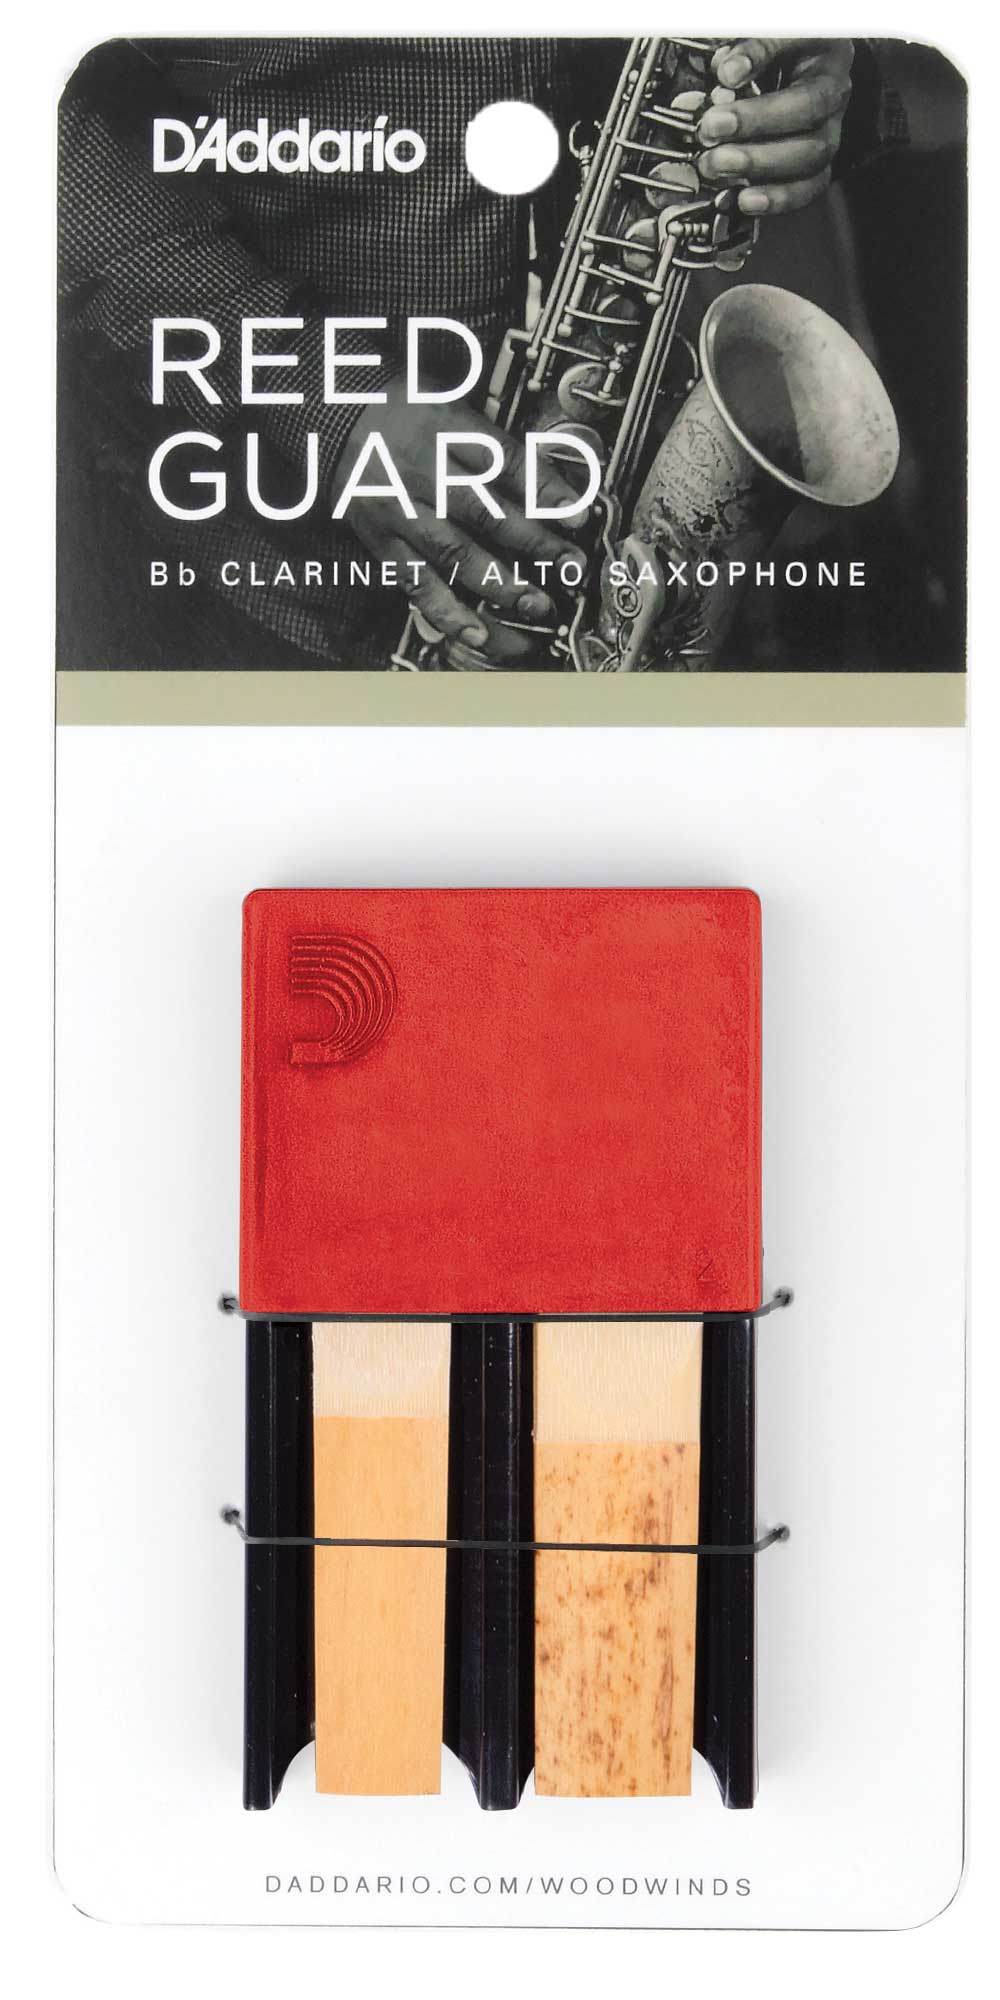 D'Addario Reed Guard - 4 Bb Clarinet or Alto Sax Reeds - Red